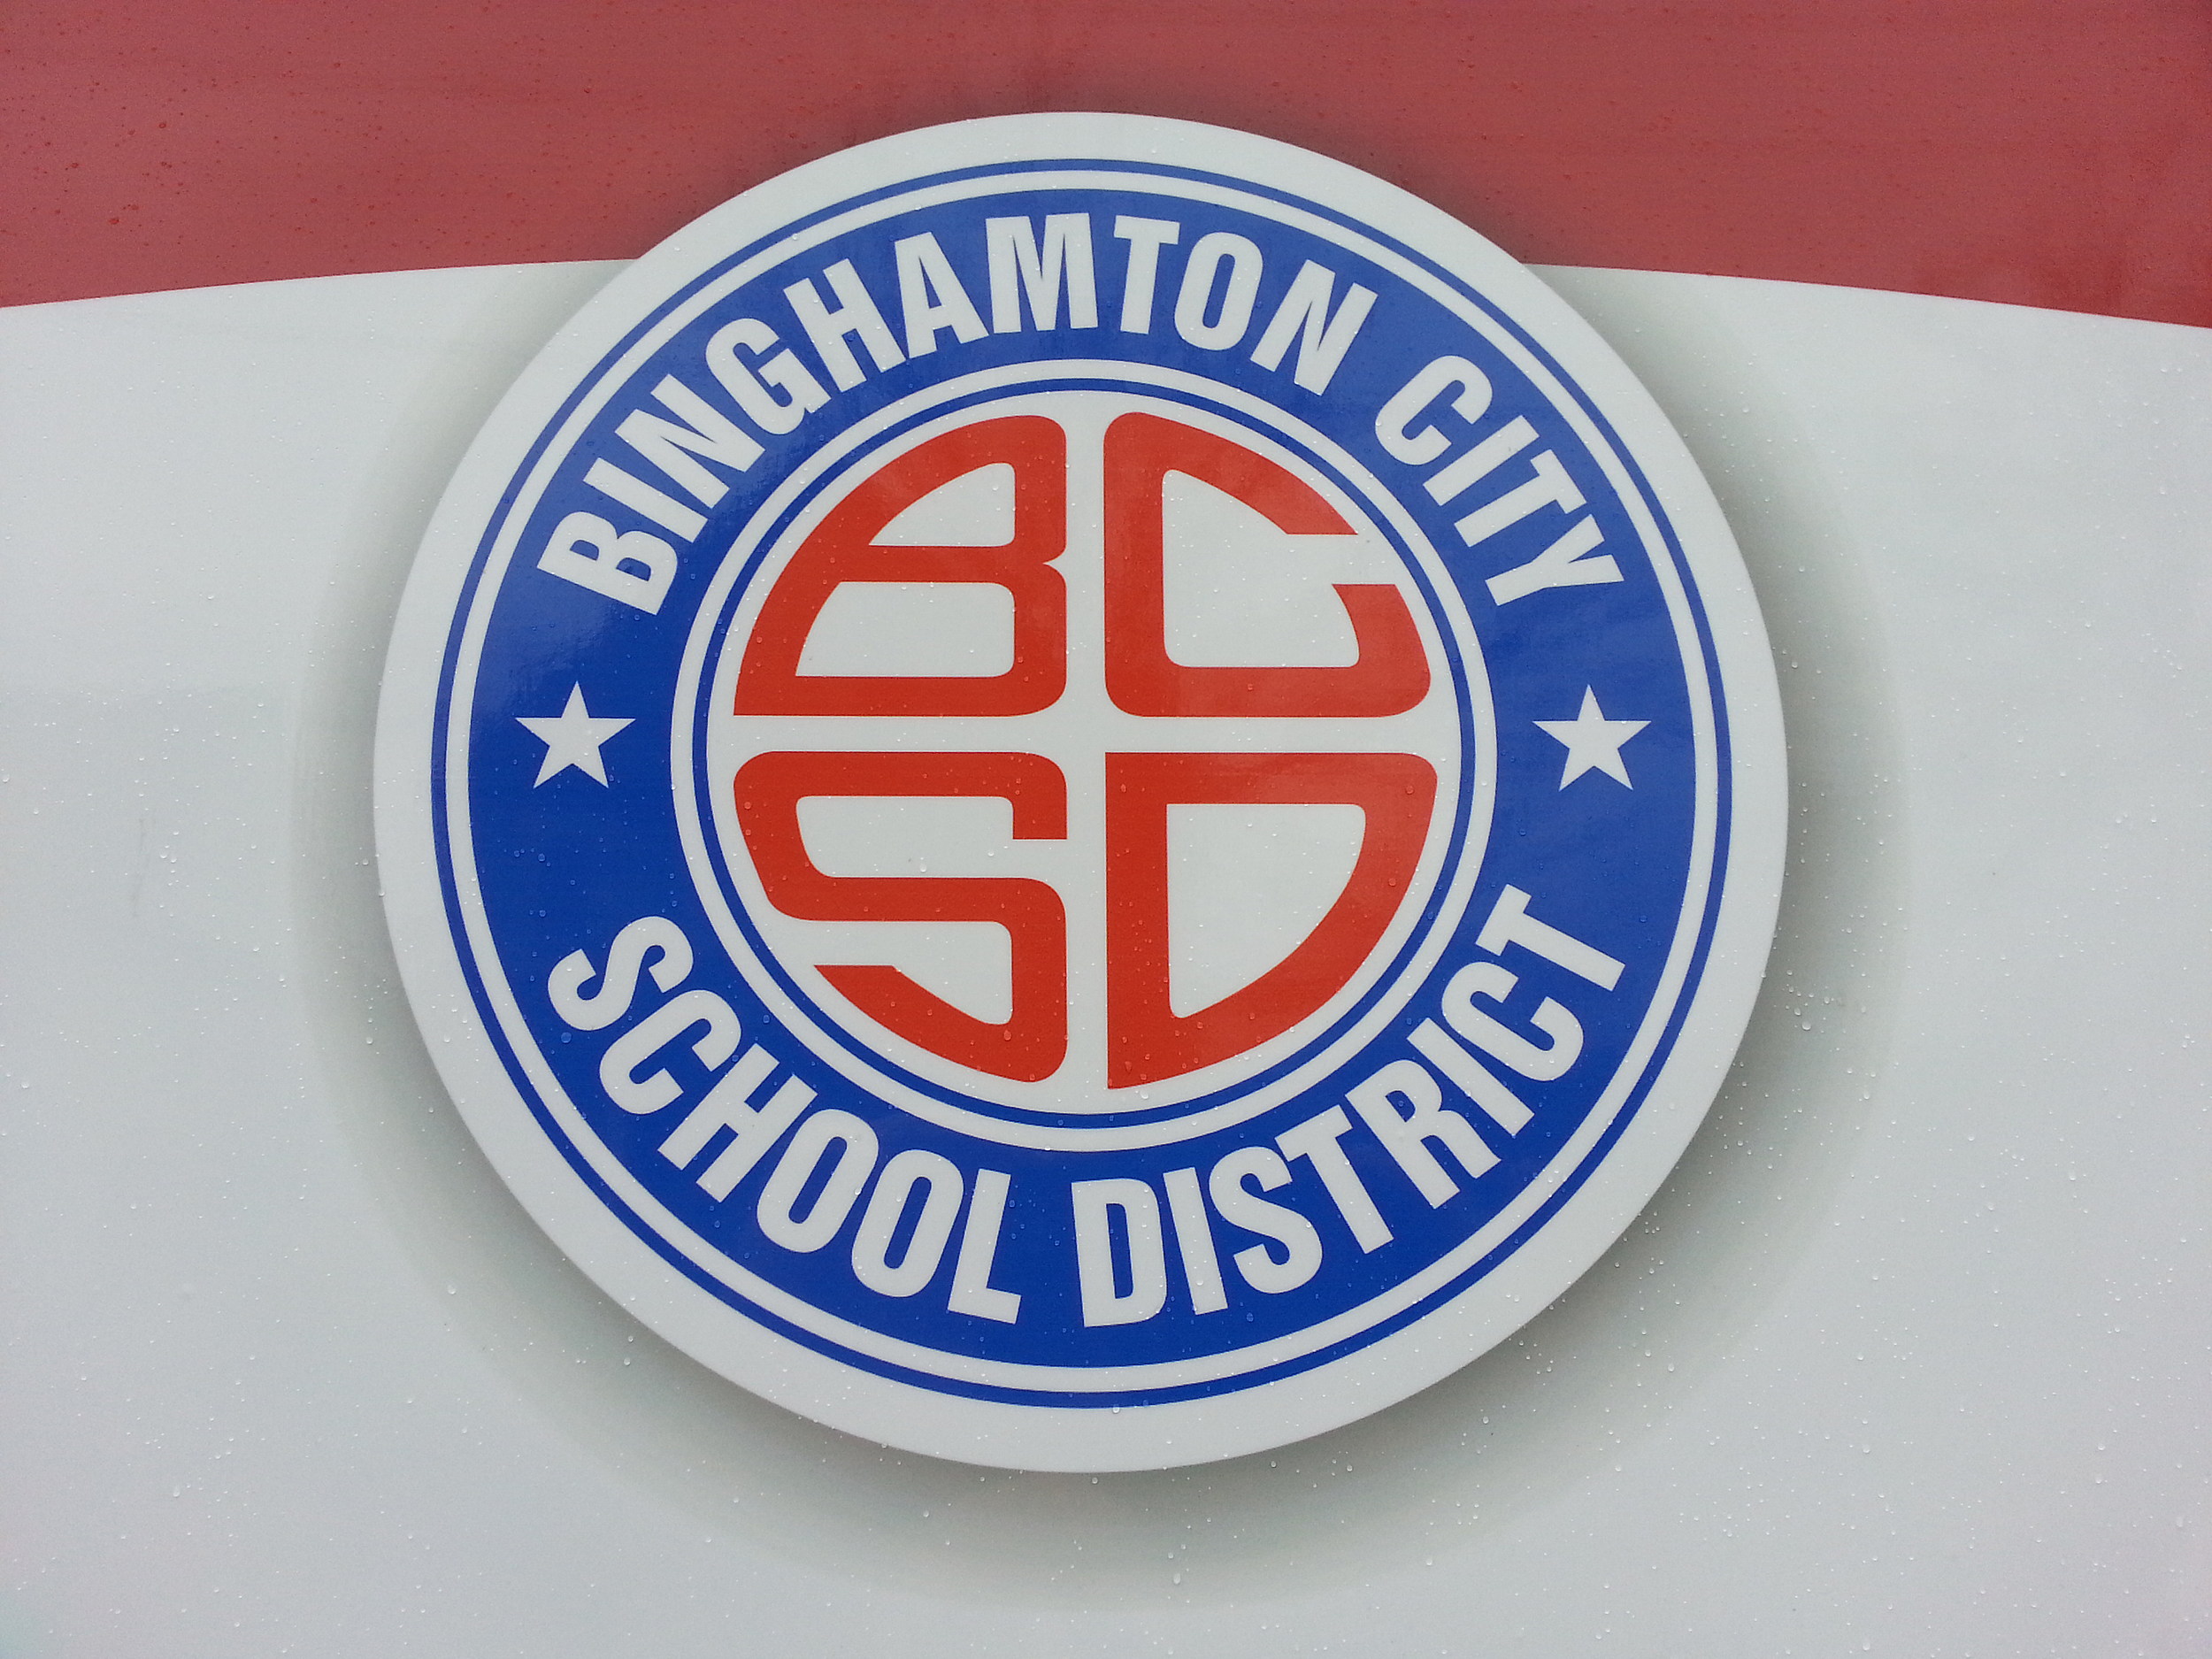 Binghamton schools put on notice after strip search of Black girls –  People's World